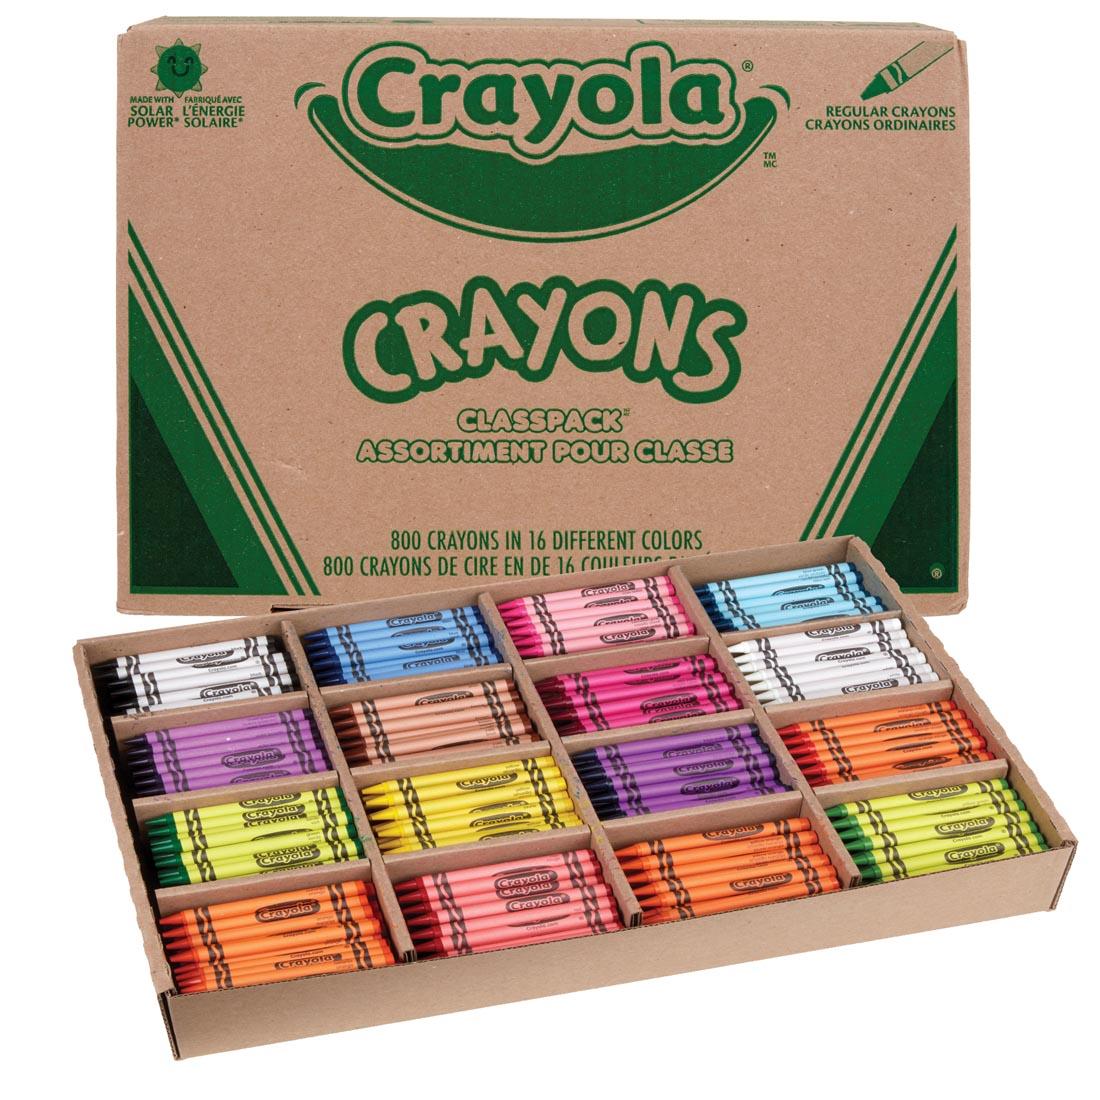 Crayola Regular Crayons 16-Color Classpack Box Shown both Open and Closed